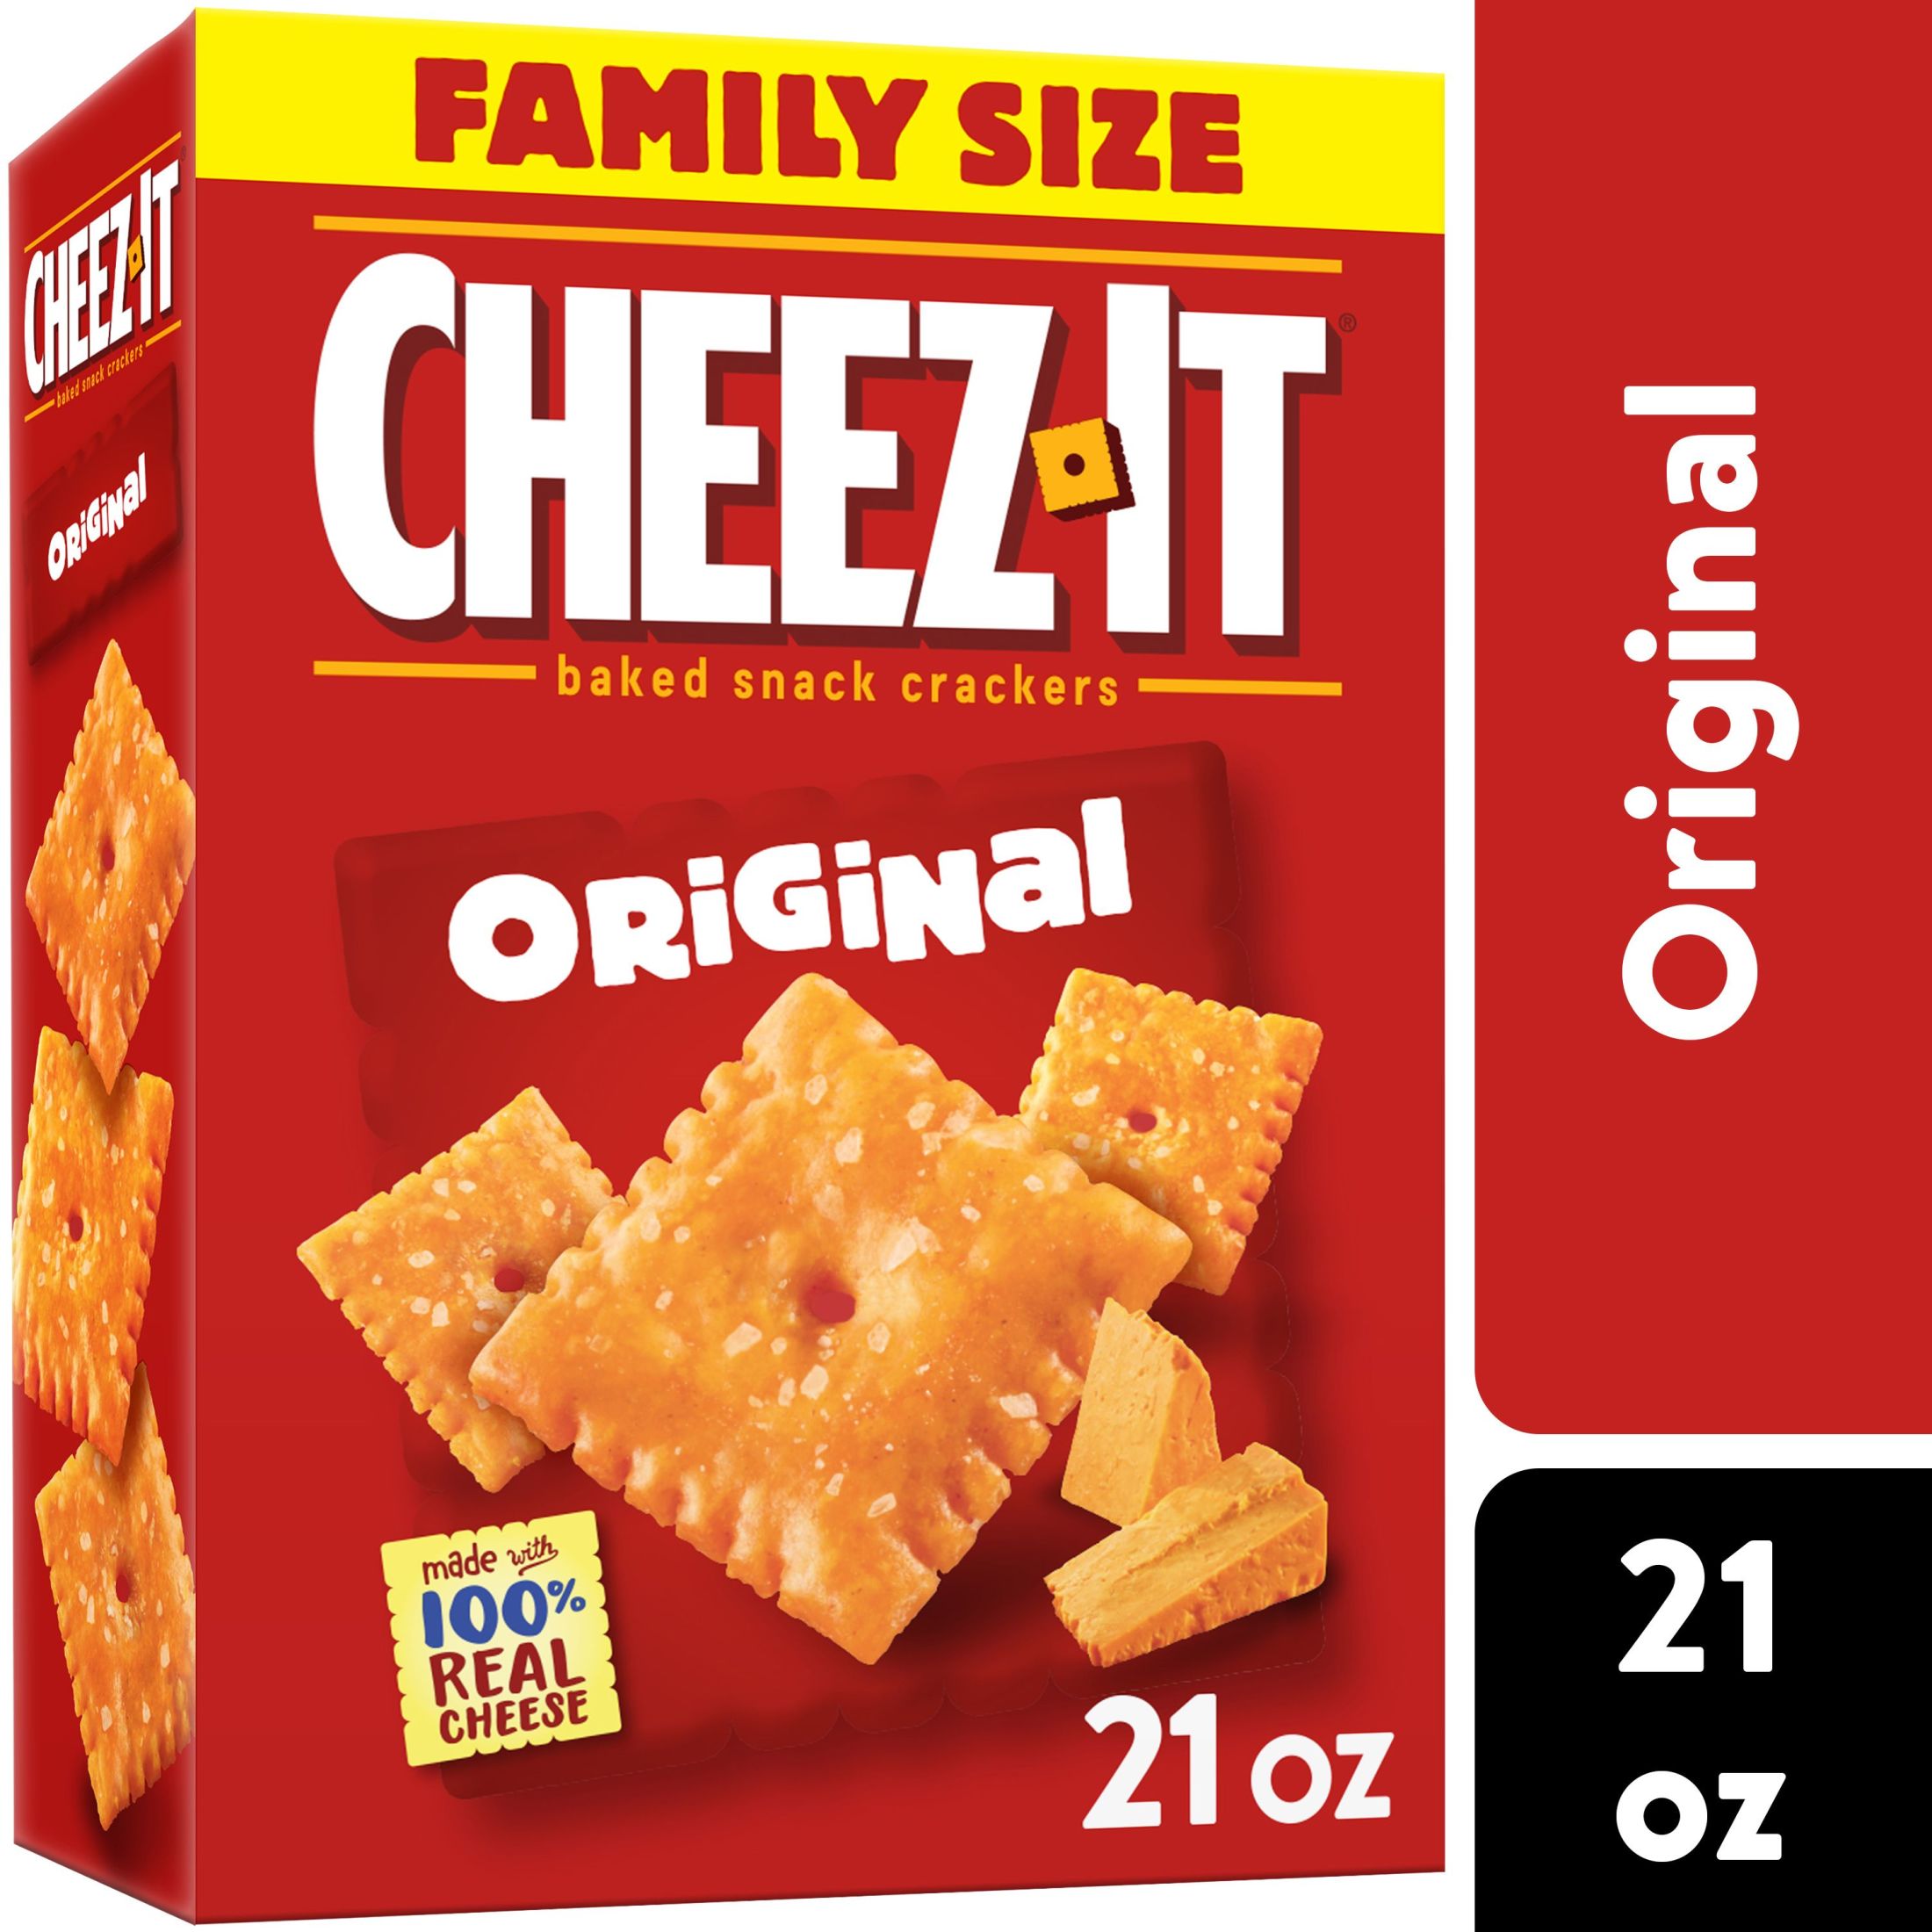 Cheez-It Original Cheese Crackers, Baked Snack Crackers, 21 oz - image 1 of 12